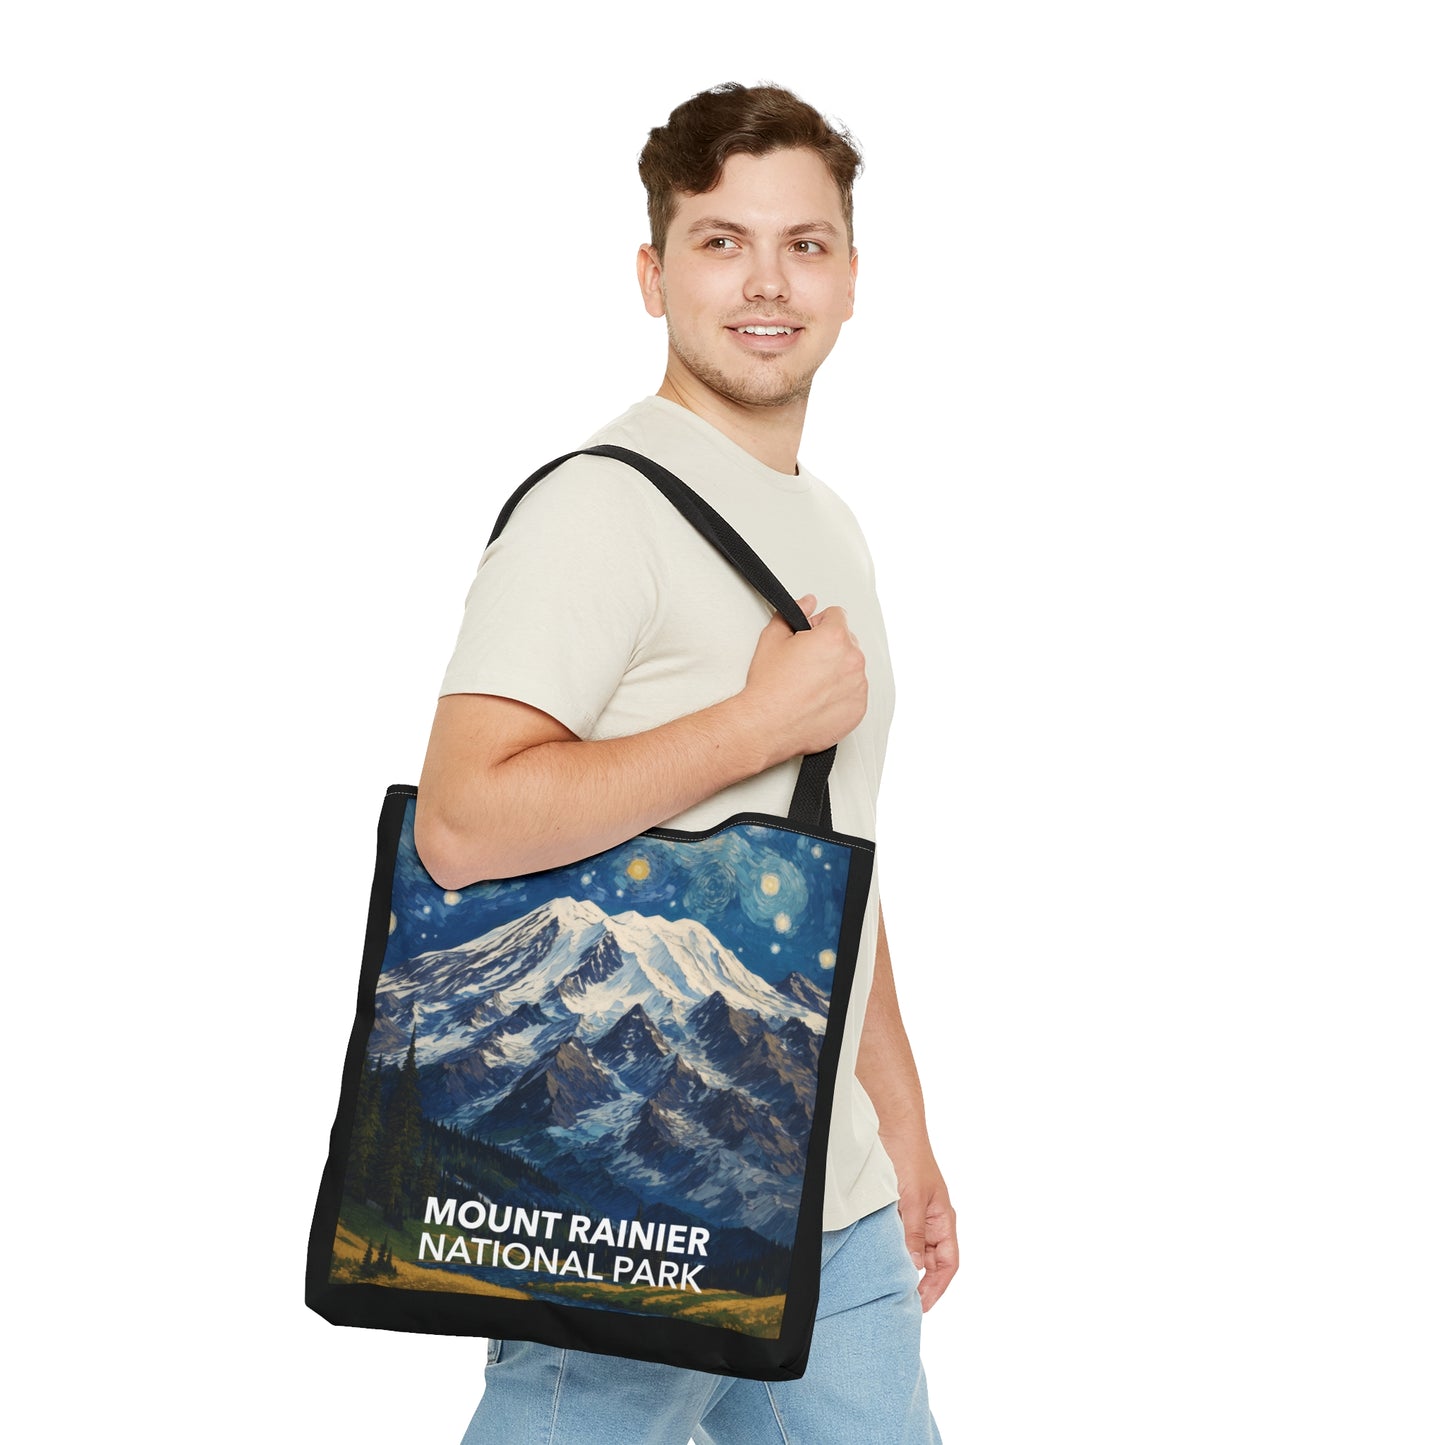 Mount Rainier National Park Tote Bag - The Starry Night